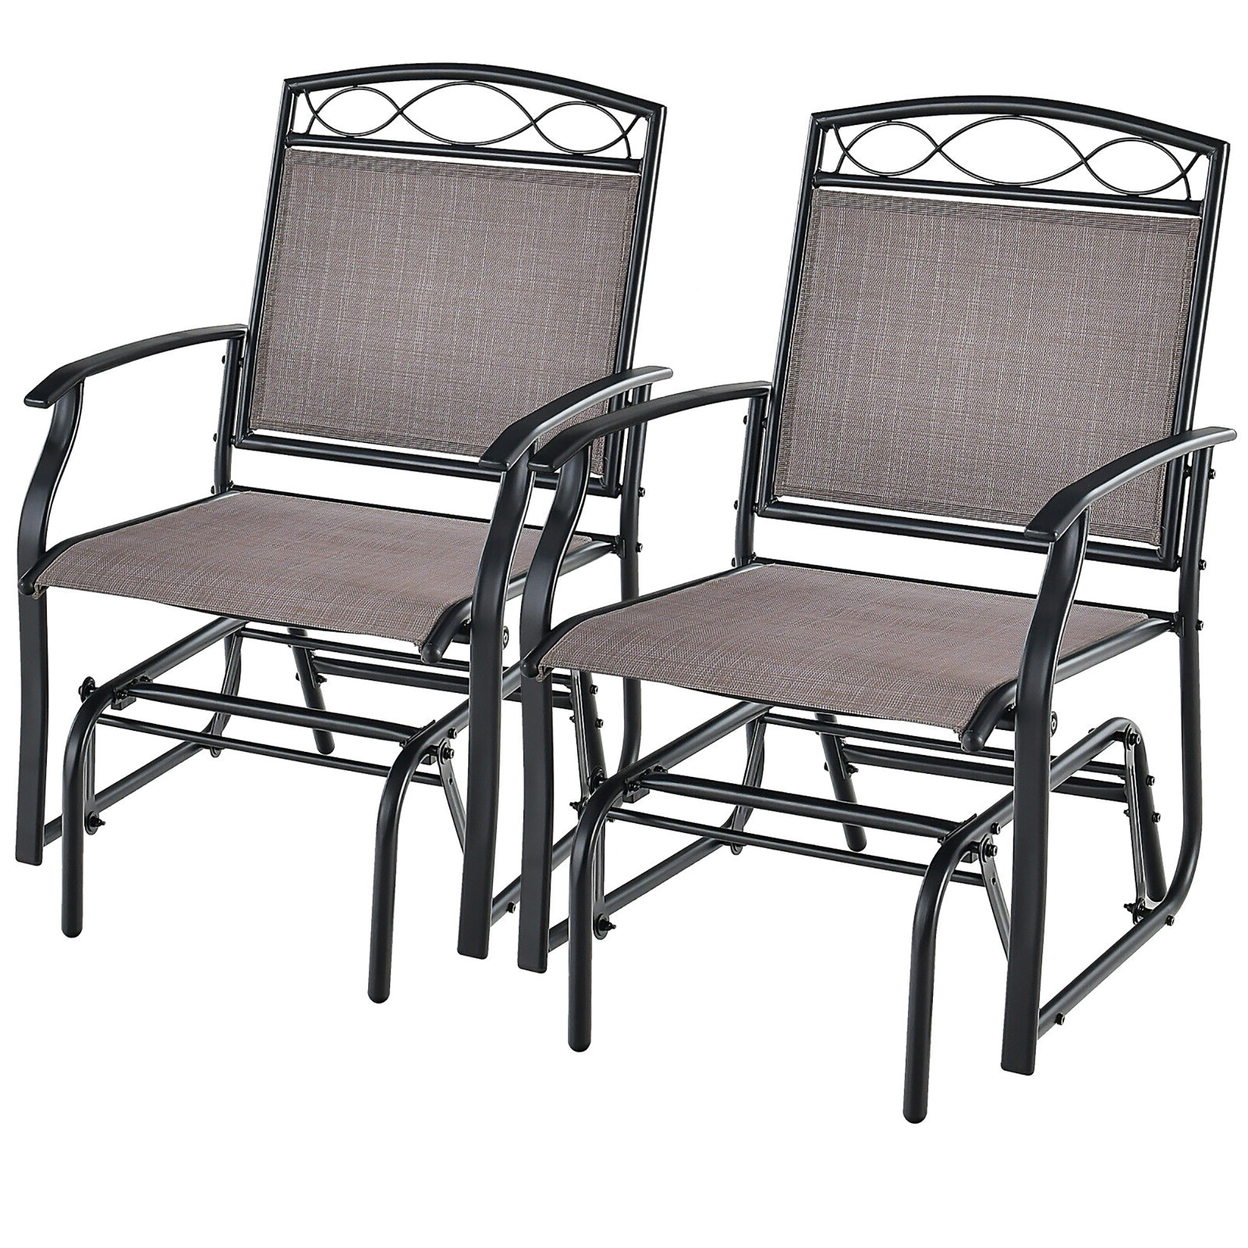 Patio Swing Glider Chairs Set Of 2 Outdoor Metal Glider Armchairs Garden Poolside